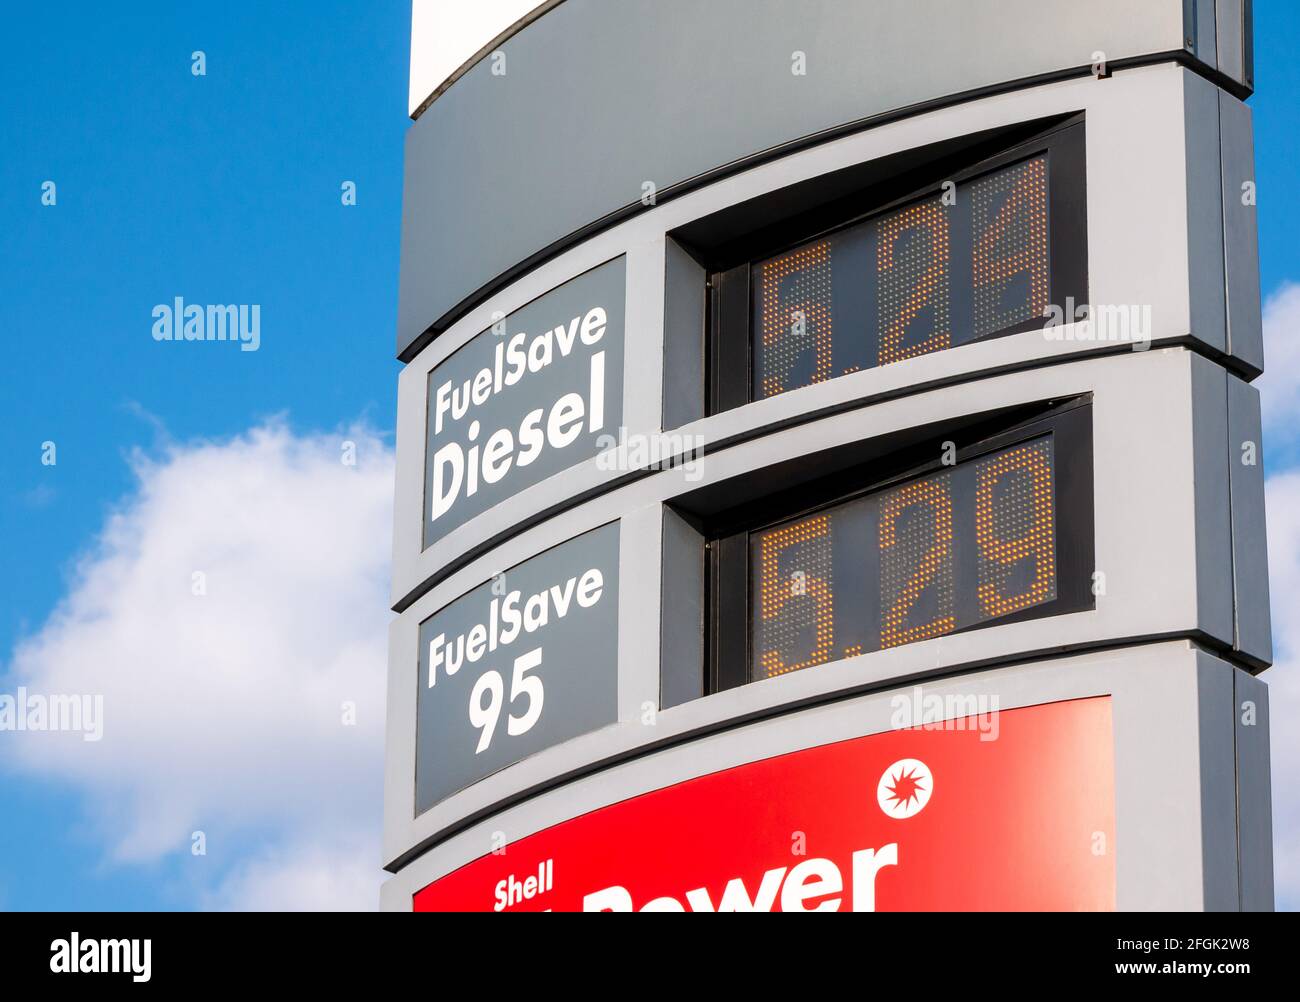 Royal Dutch Shell gas station signage gas prices closeup, FuelSave Diesel, 95, price numbers up close, detail Fuel, gasoline petrol industry economy, Stock Photo